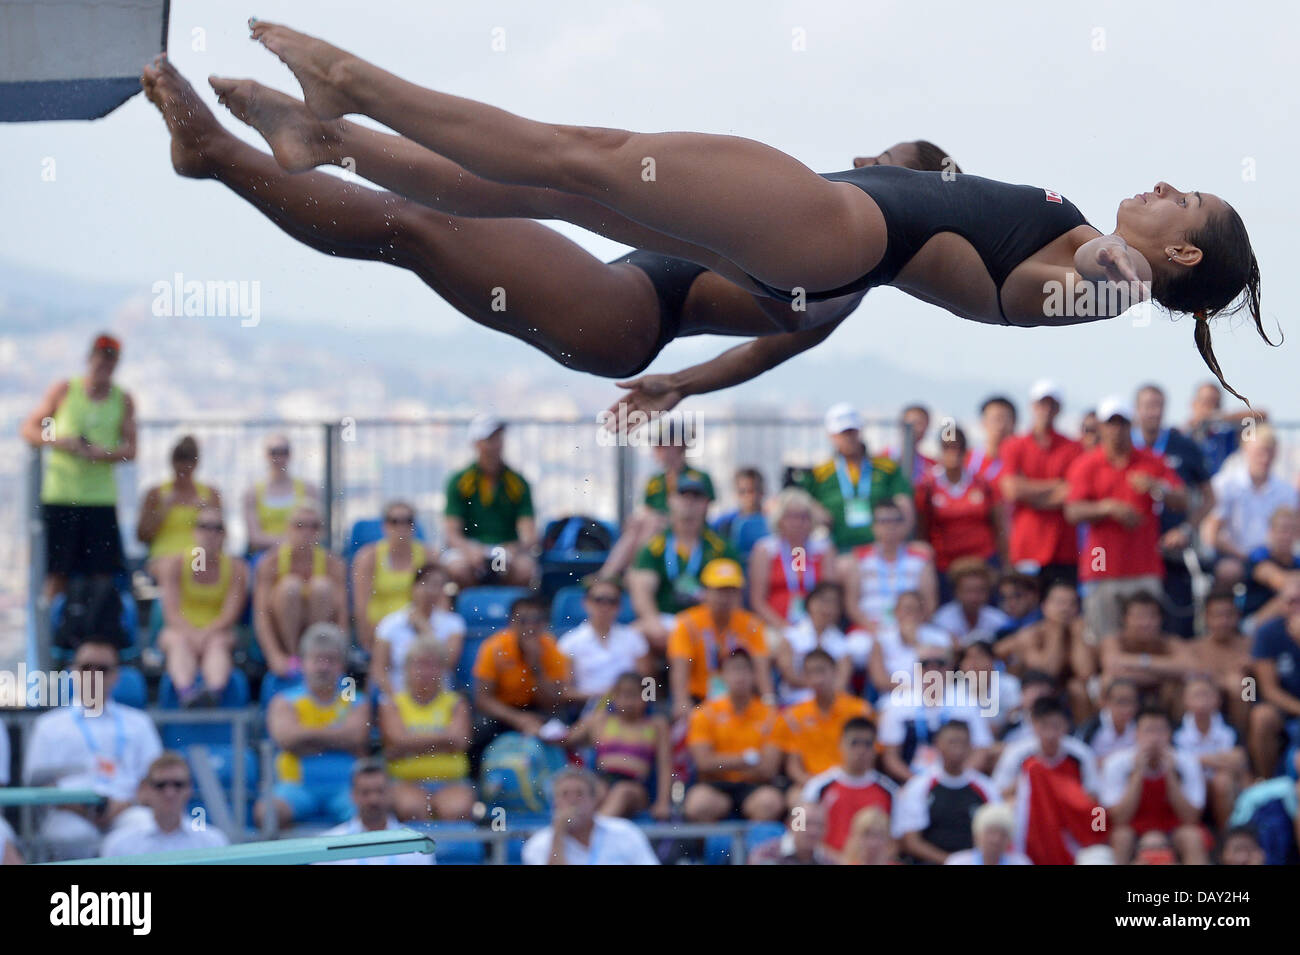 Barcelona, Spain. 20th July, 2013. Jennifer Abel and Pamela Ware of Canada in action during the women's 3m Synchro Springboard diving final of the 15th FINA Swimming World Championships at Montjuic Municipal Pool in Barcelona, Spain, 20 July 2013. Foto: David Ebener/dpa /dpa/Alamy Live News Stock Photo